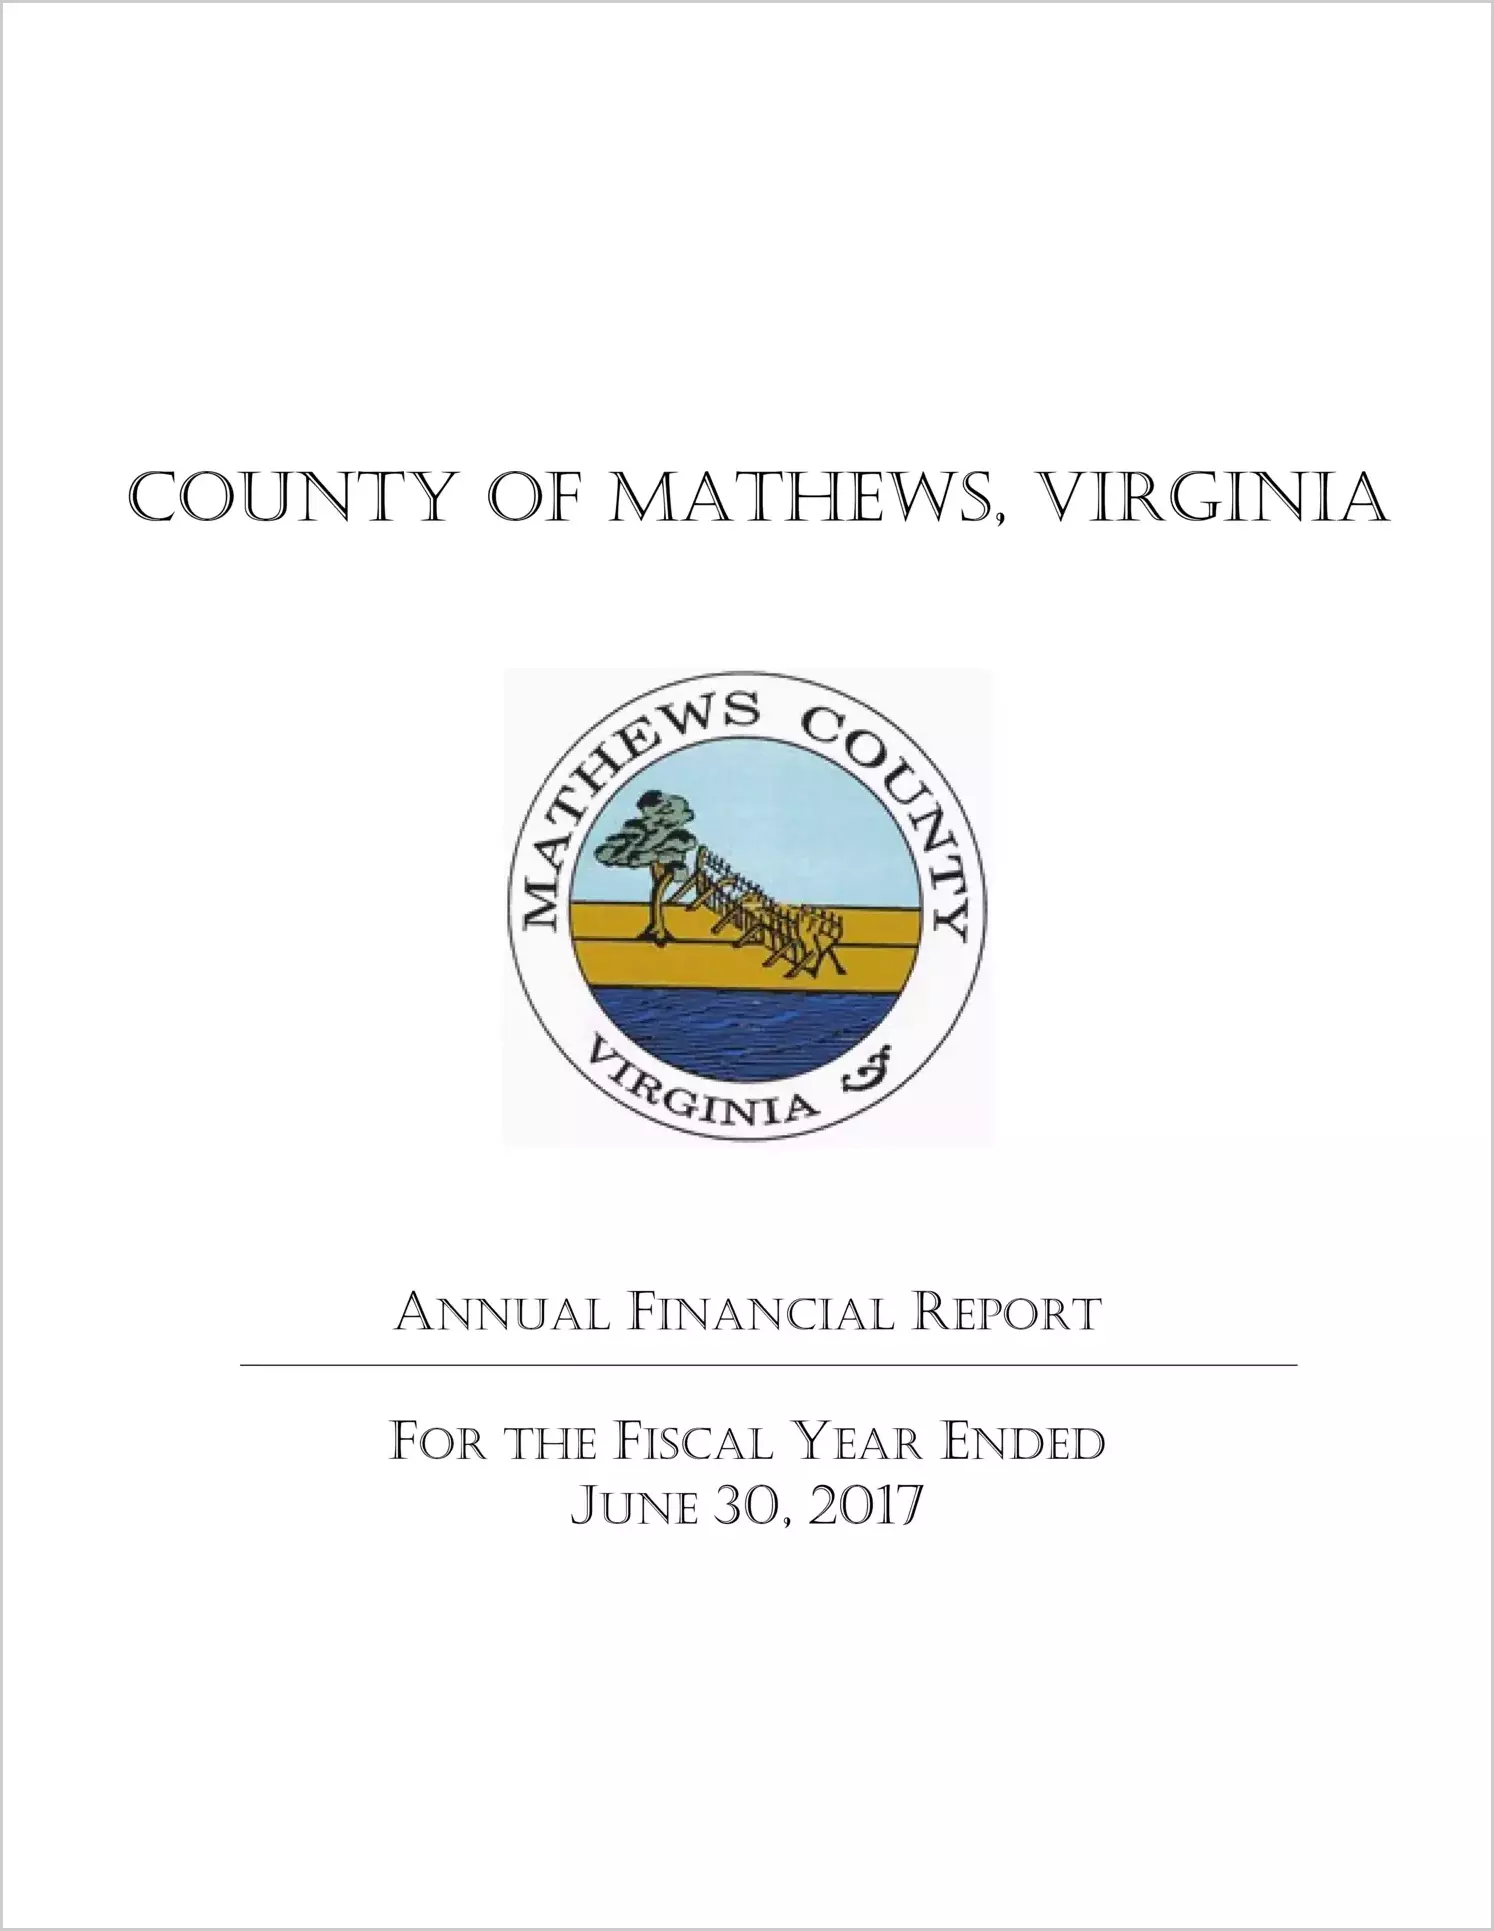 2017 Annual Financial Report for County of Mathews